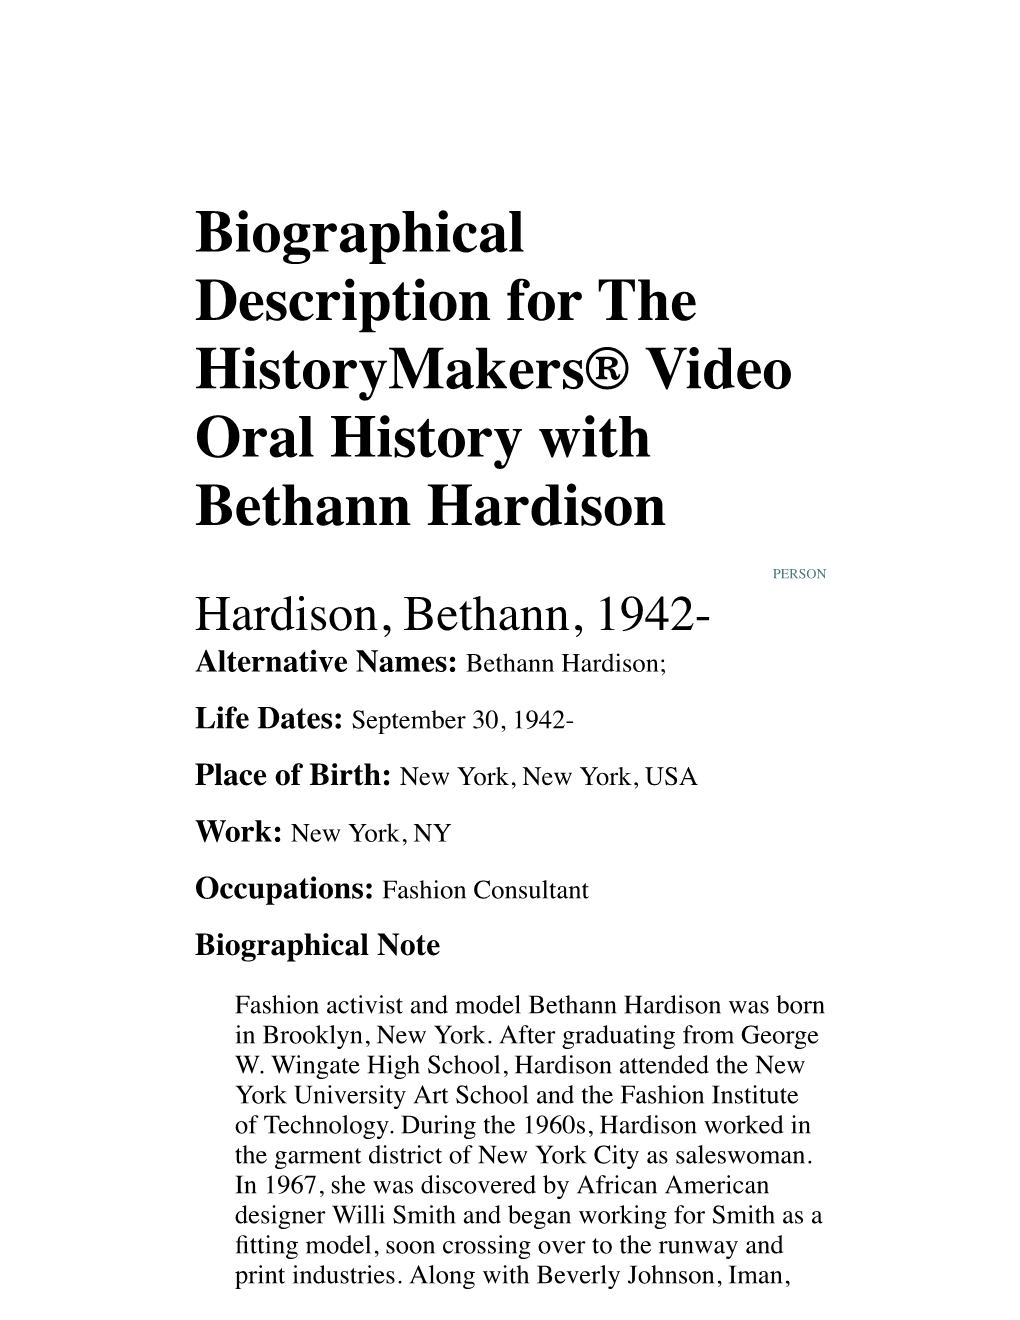 Biographical Description for the Historymakers® Video Oral History with Bethann Hardison